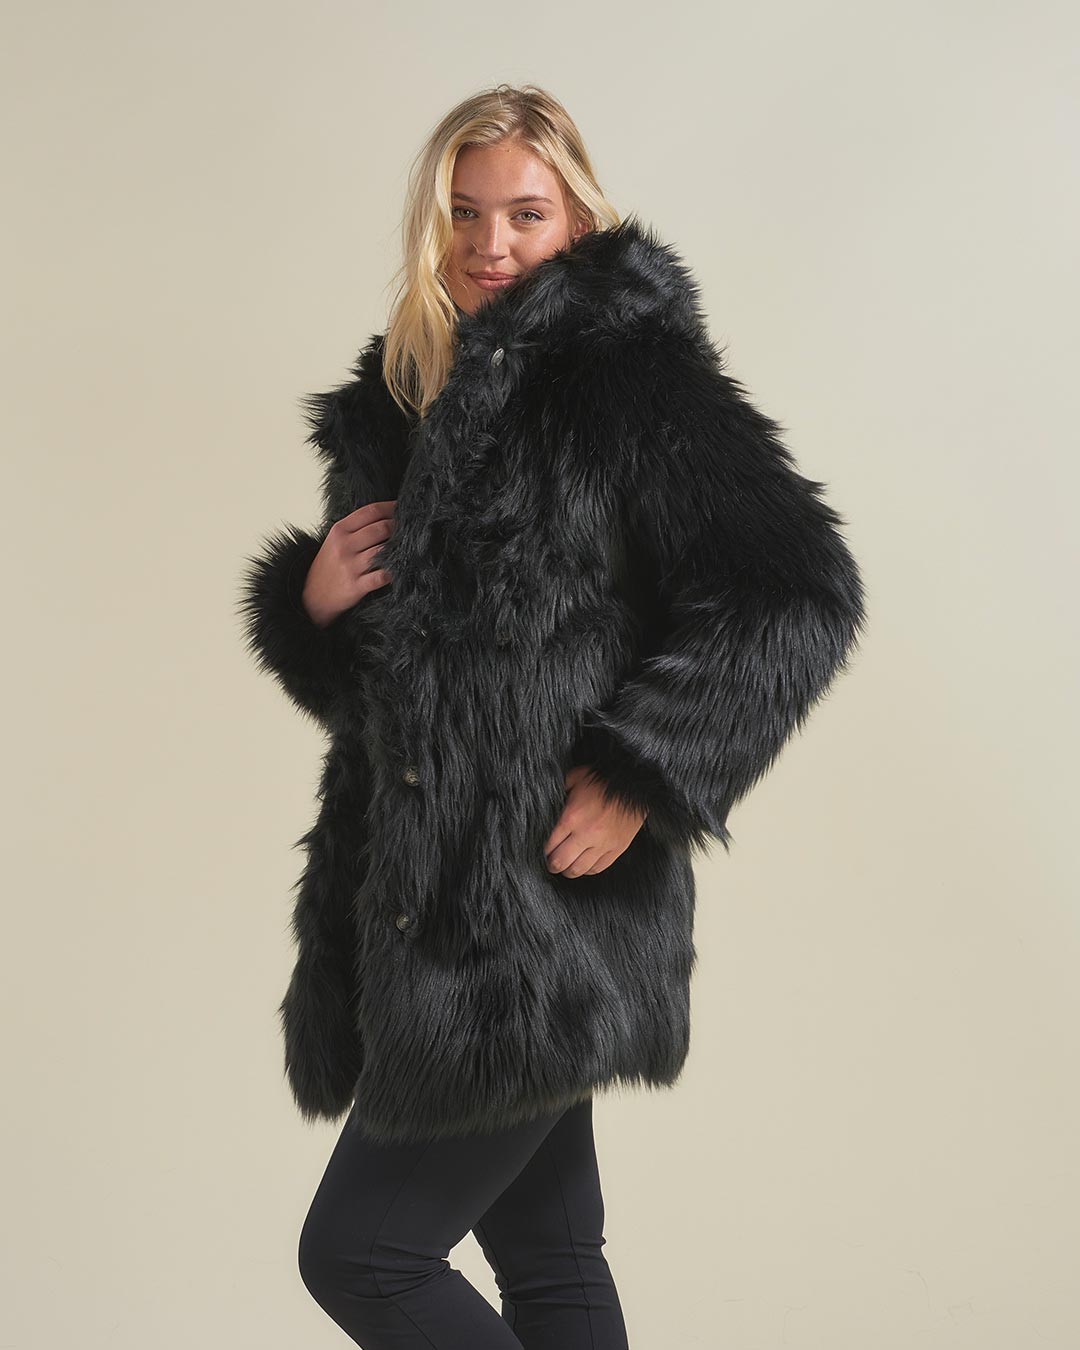 Blonde Woman Wearing Black Wolf Hooded Faux Fur Coat Without Hood